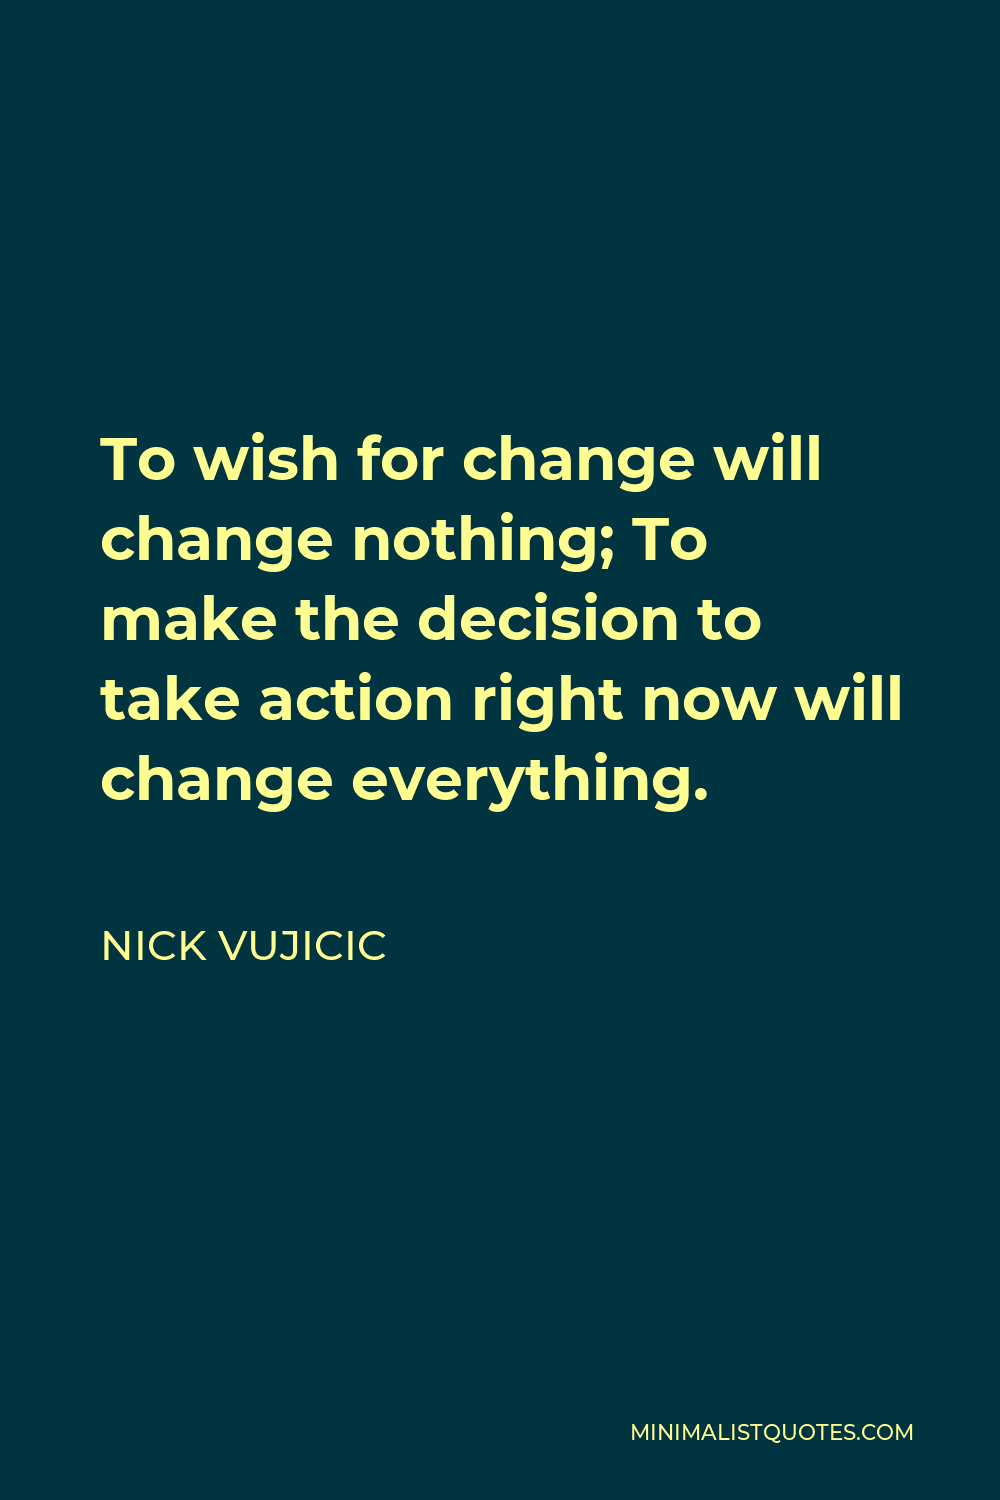 Nick Vujicic Quote - To wish for change will change nothing; To make the decision to take action right now will change everything.